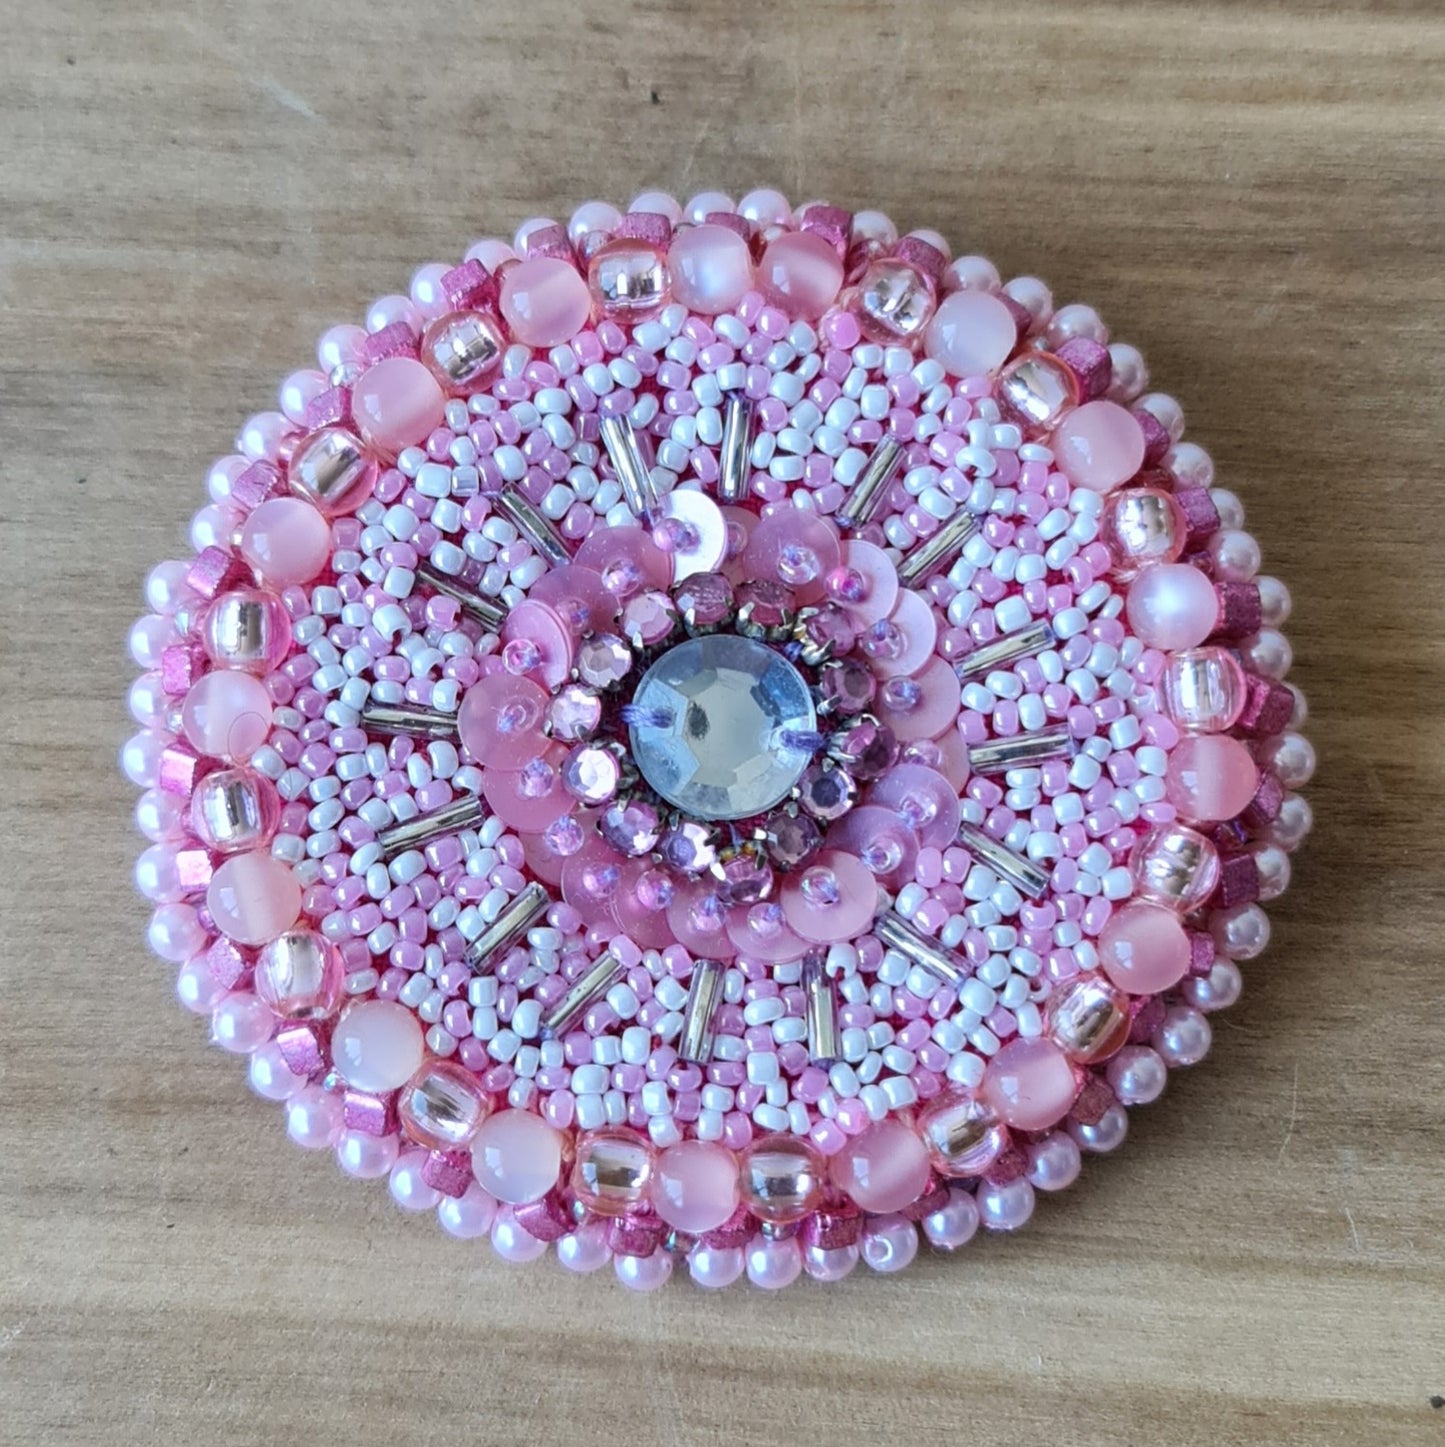 Pearled round brooch in soft pink / white / silver tones / diameter 7.7 cm (AMA)